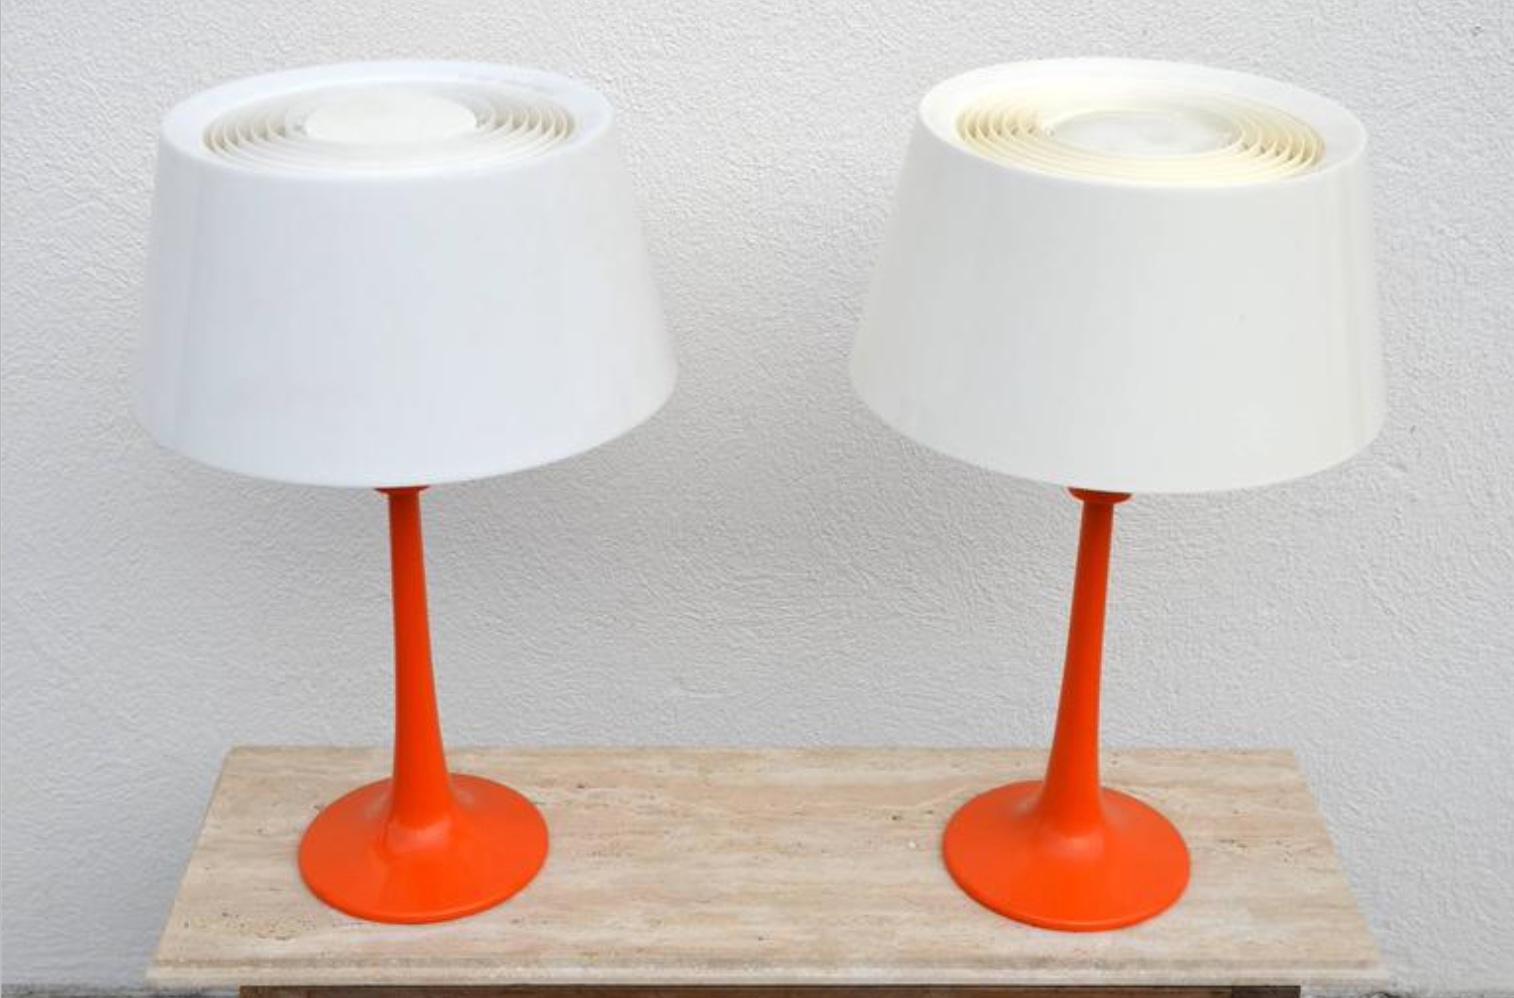 Pair of pristine vintage Lumilon table lamps by Gerald Thurston for Lightolier. Original one-piece shade-diffusers. UL listed.